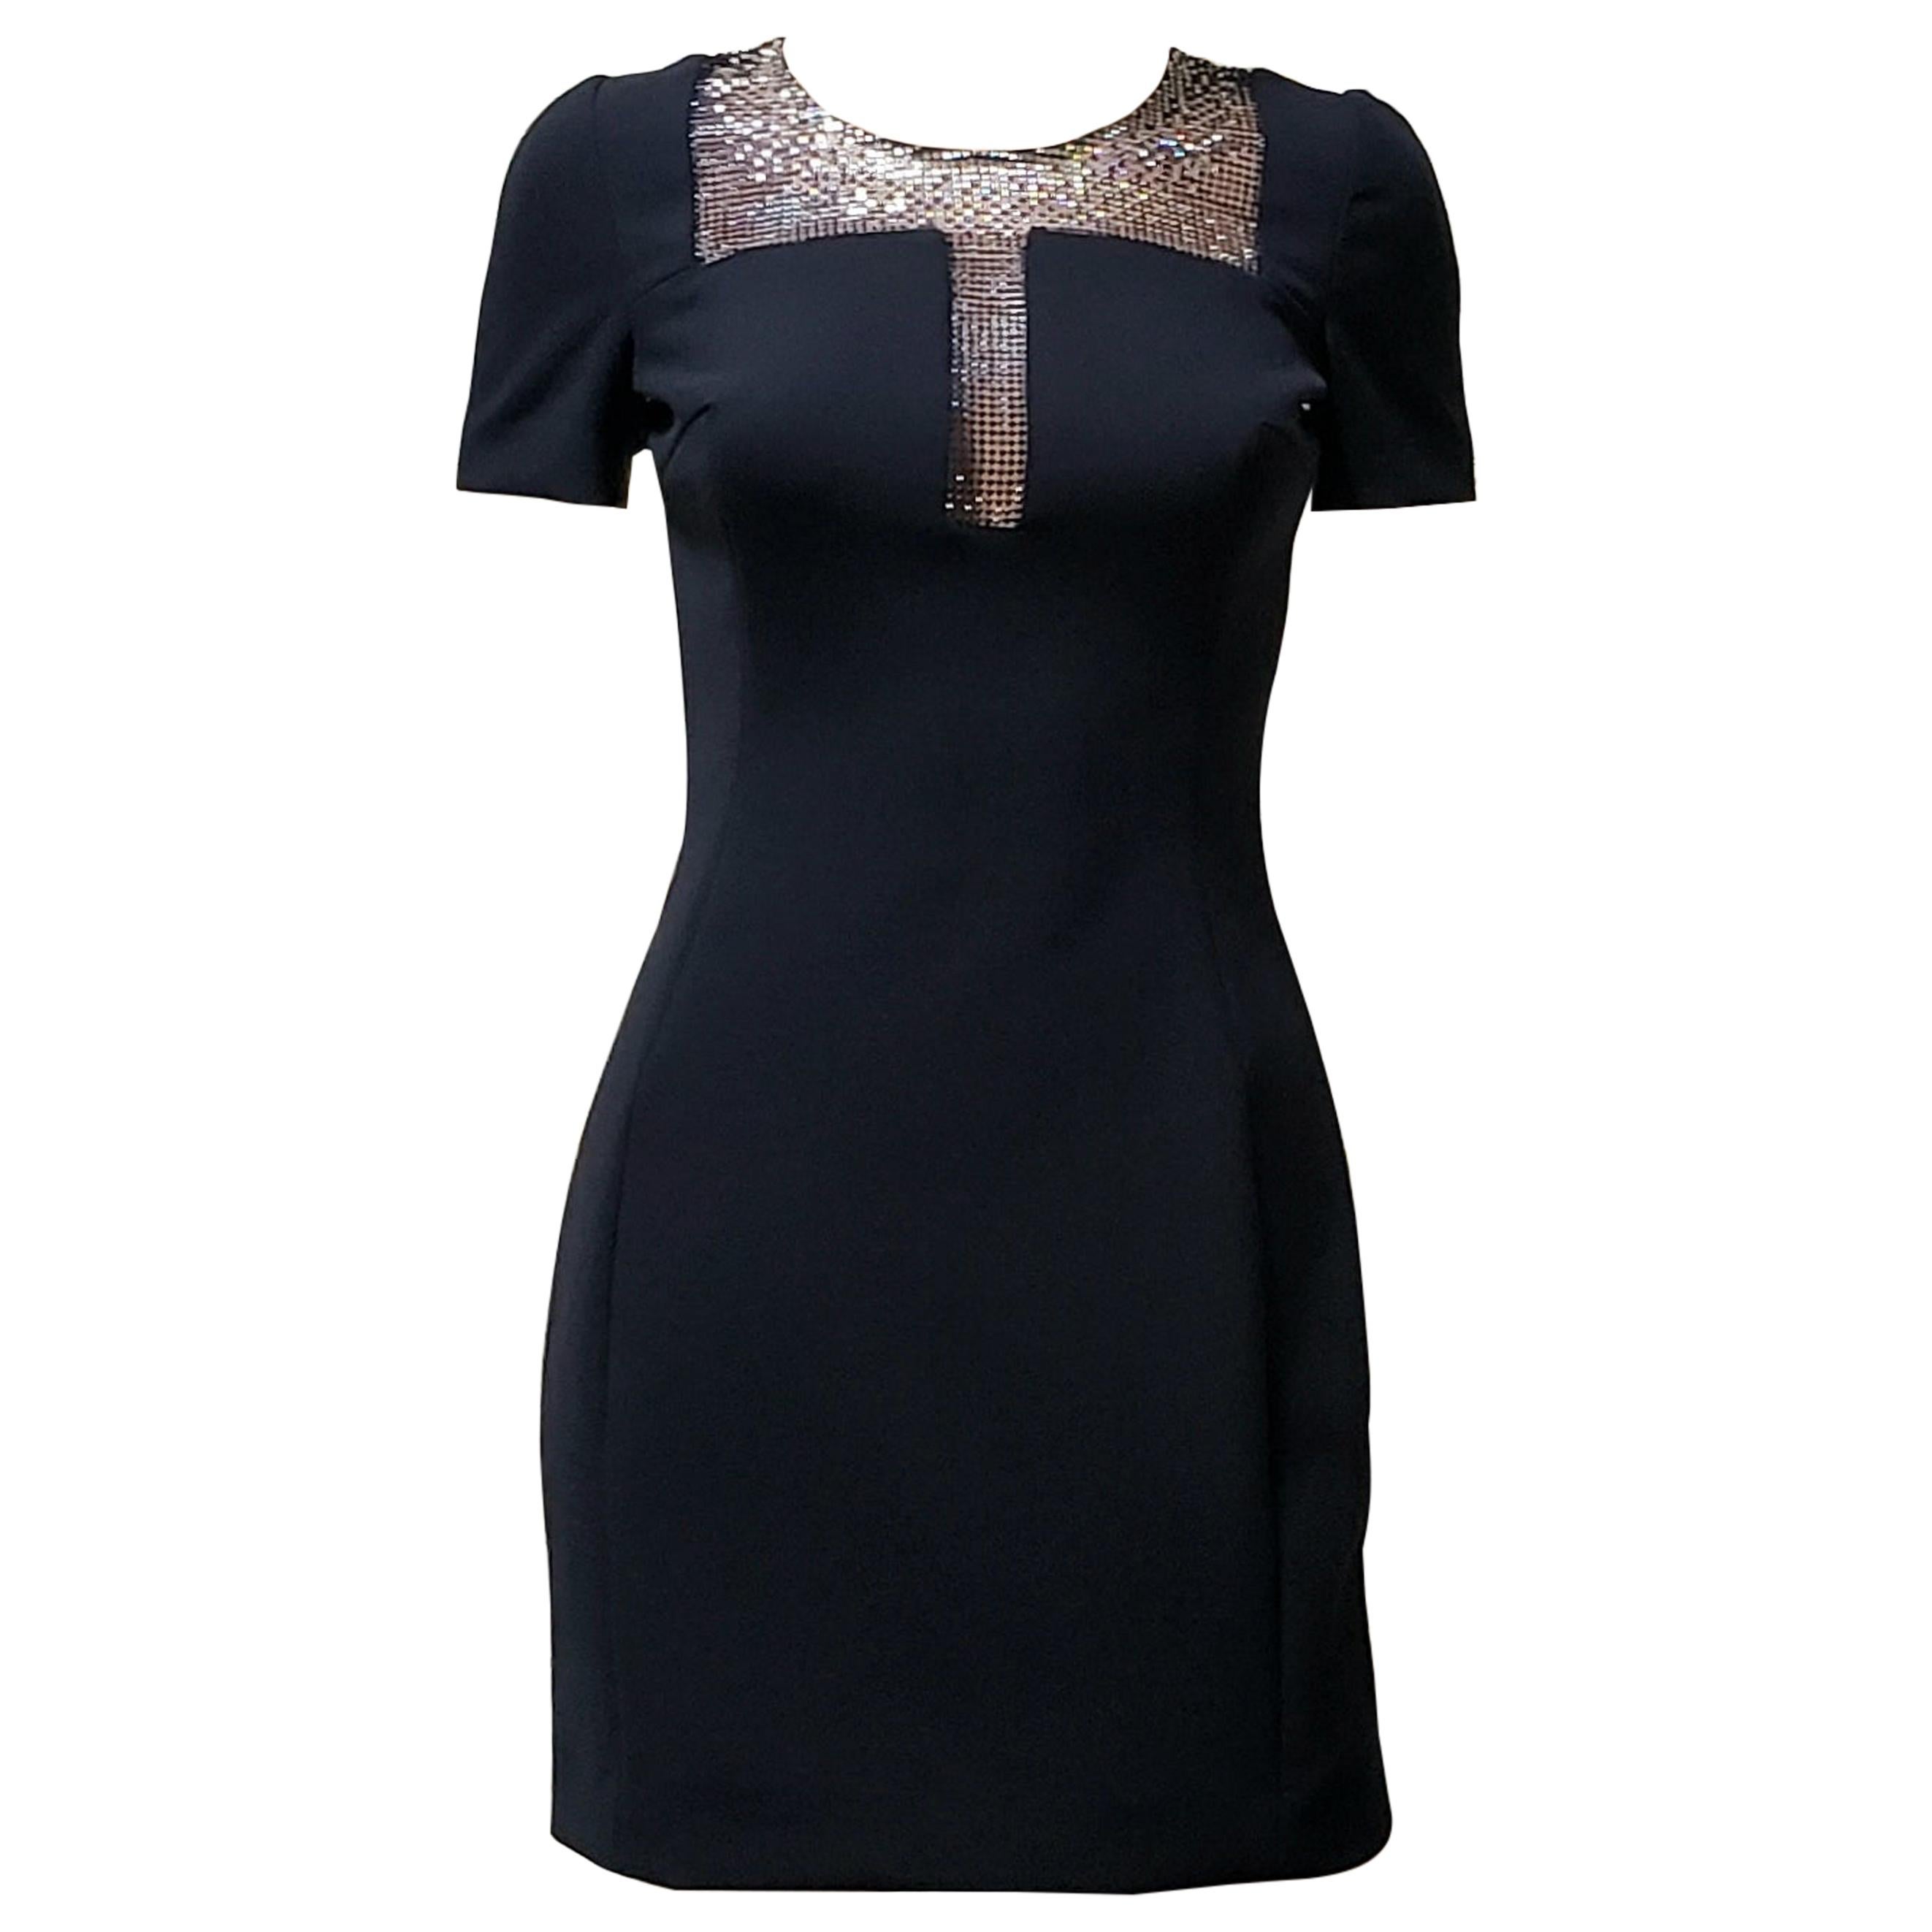 New VERSACE COLLECTION CRYSTAL EMBELLISHED DRESS 40 - 4